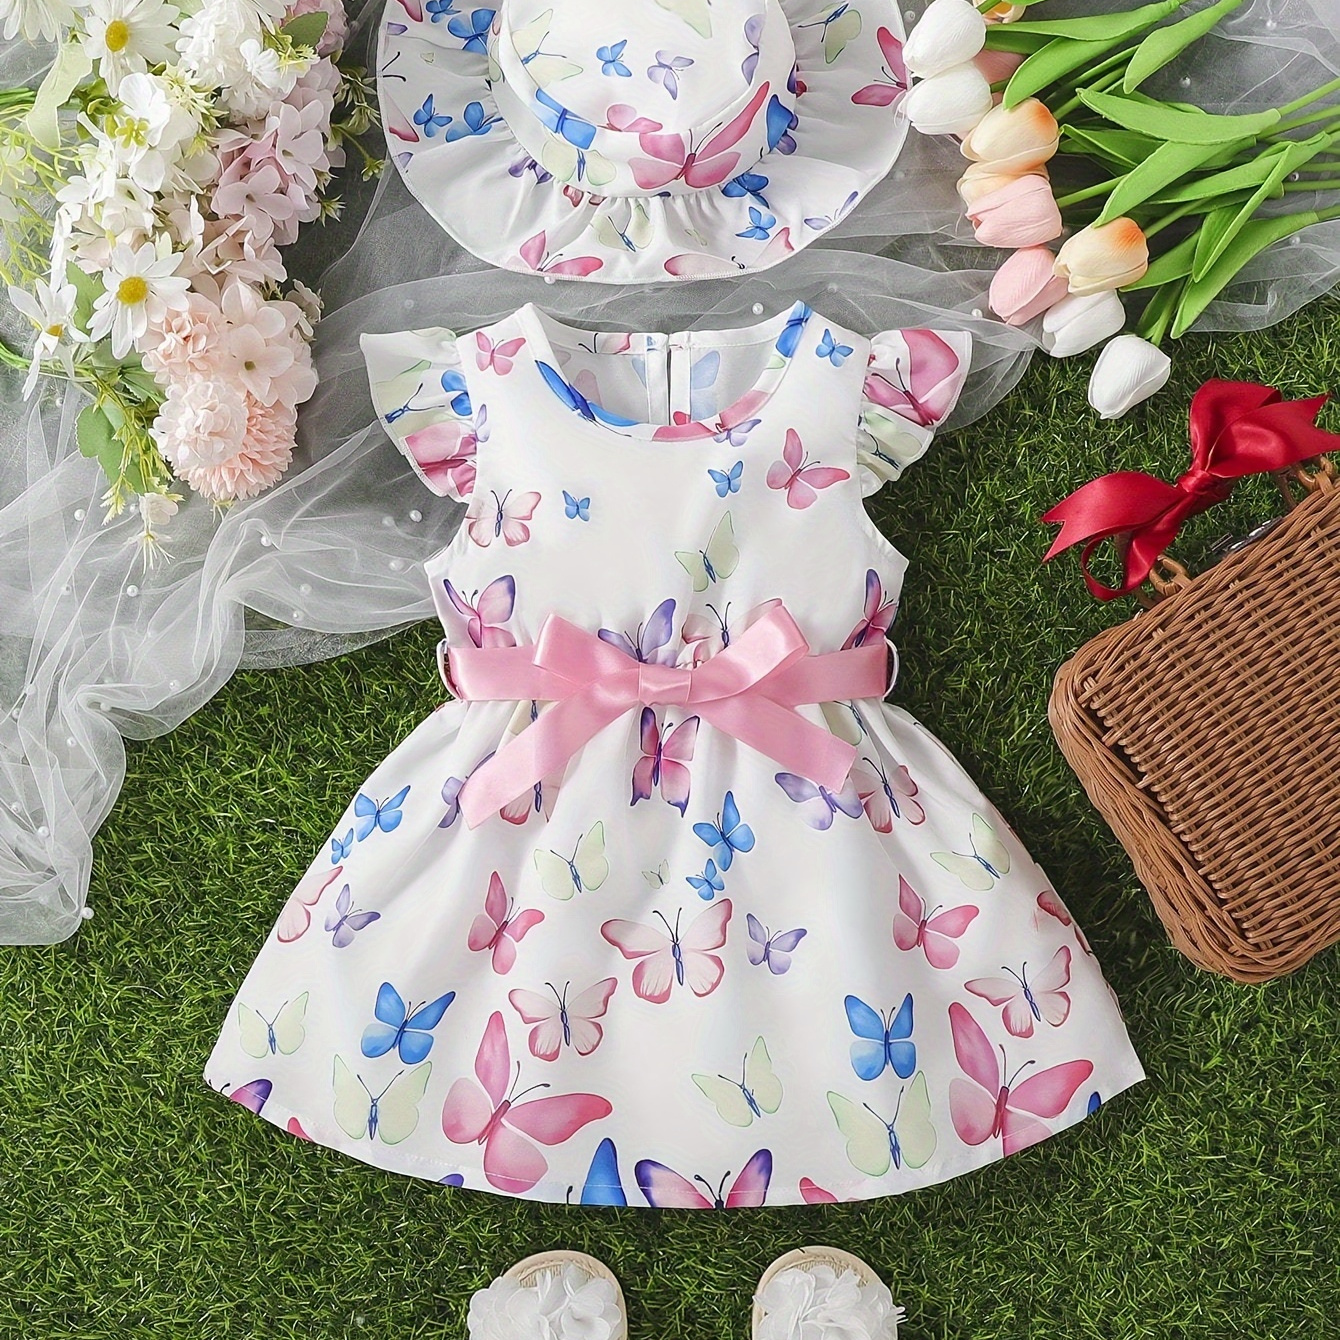 

Baby's Colorful Butterfly Pattern Dress & Hat, Lovely Casual Cap Sleeve Dress, Infant & Toddler Girl's Clothing For Summer/spring, As Gift